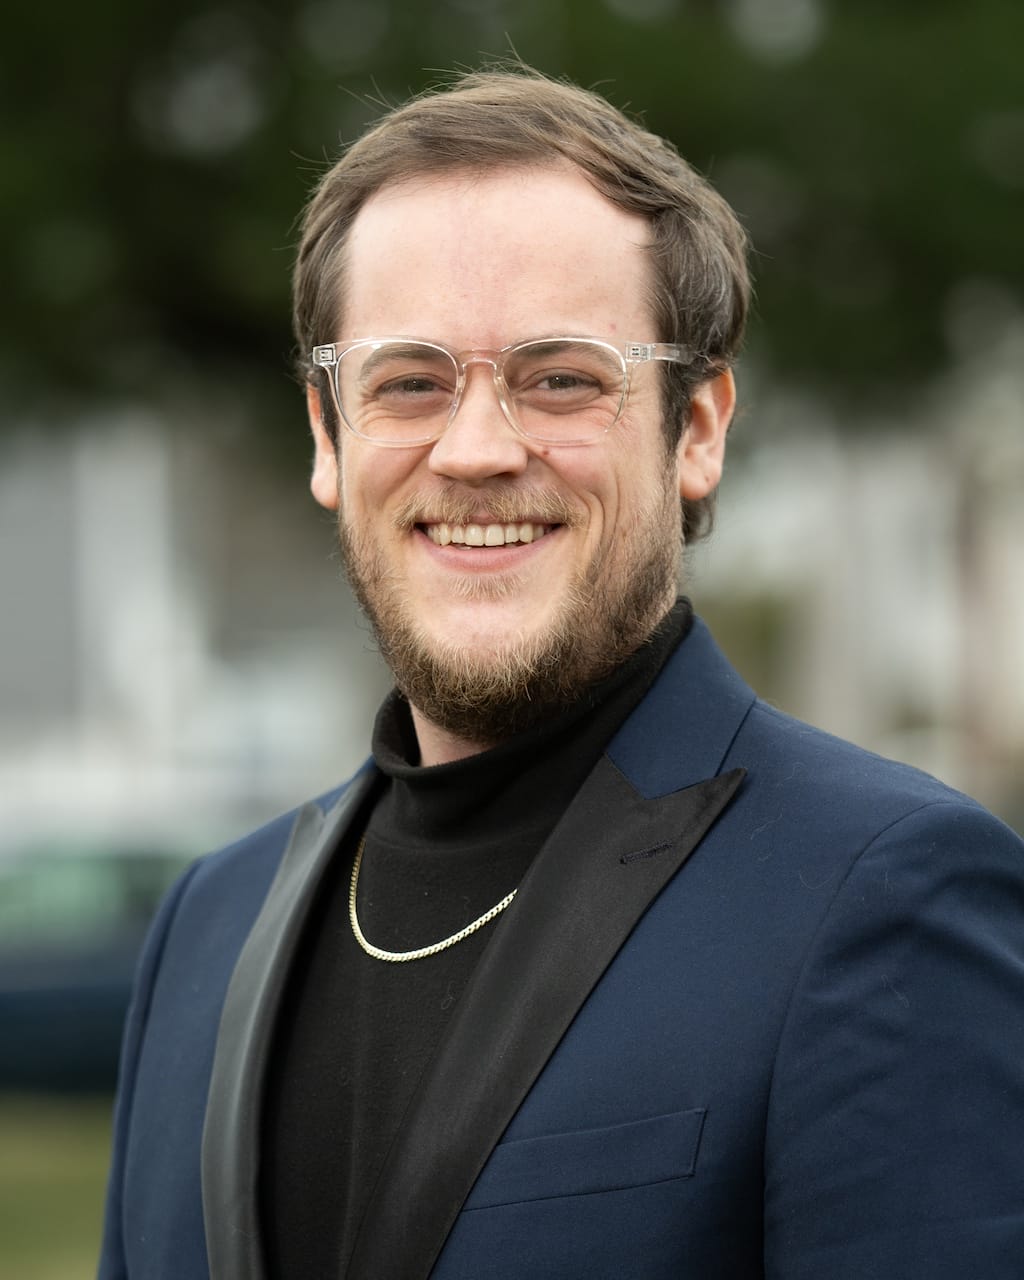 A man with glasses, a beard, and short hair, wearing a blue suit jacket over a black turtleneck and a gold chain, smiles at the camera. The background is blurred greenery.